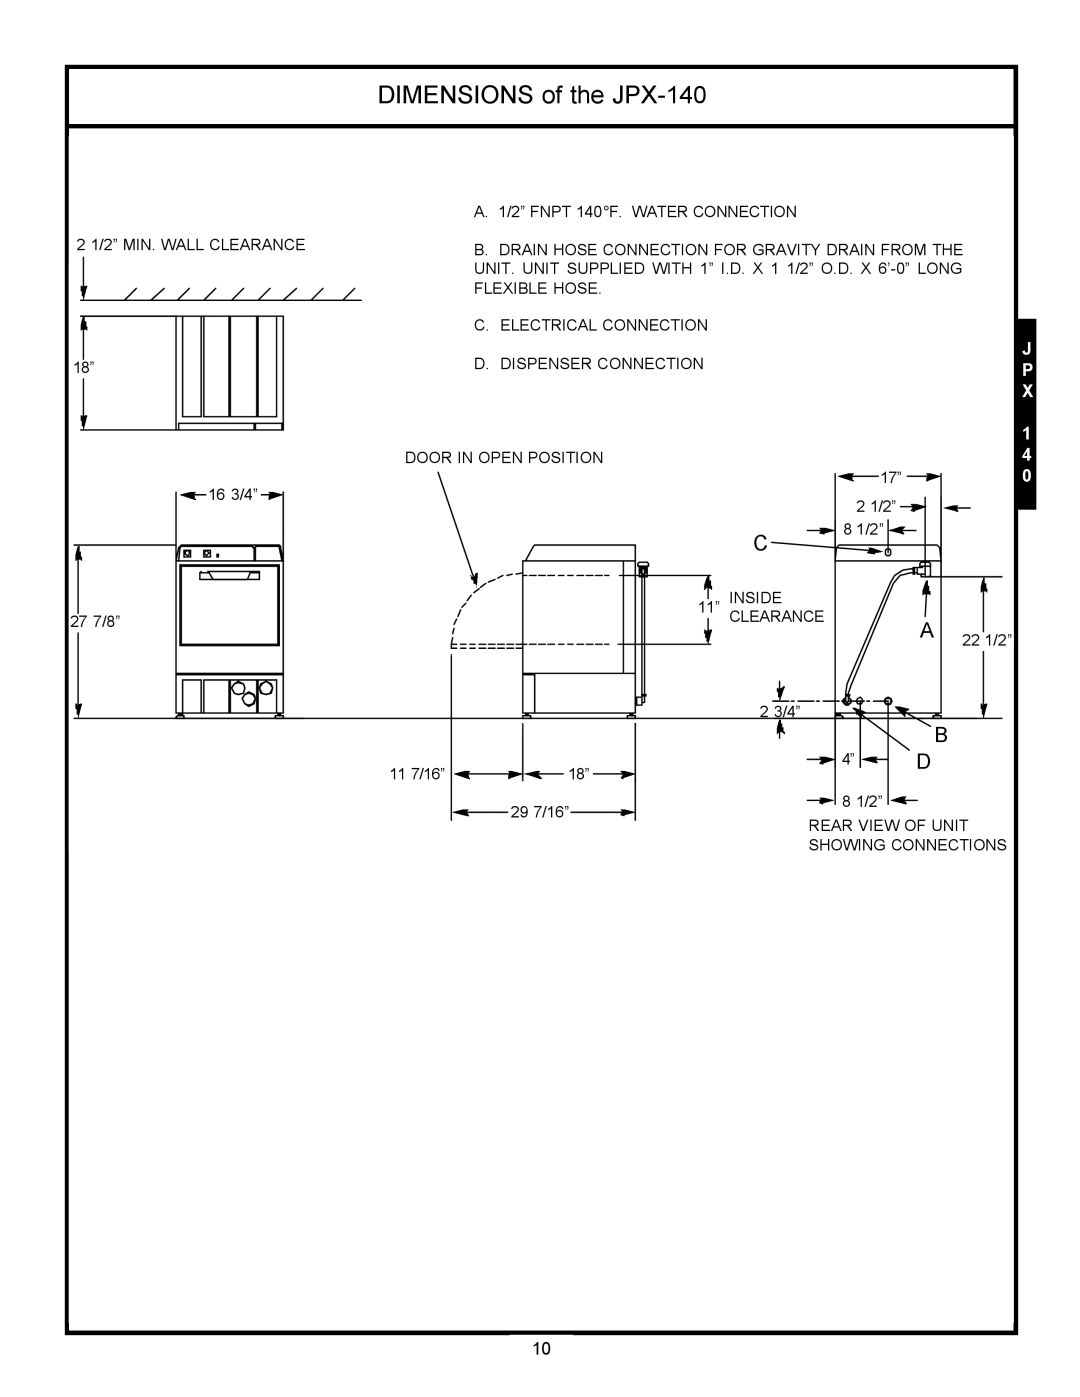 Jackson JPX-160, JPX-200, jpx-140 service manual DIMENSIONS of the JPX-140 